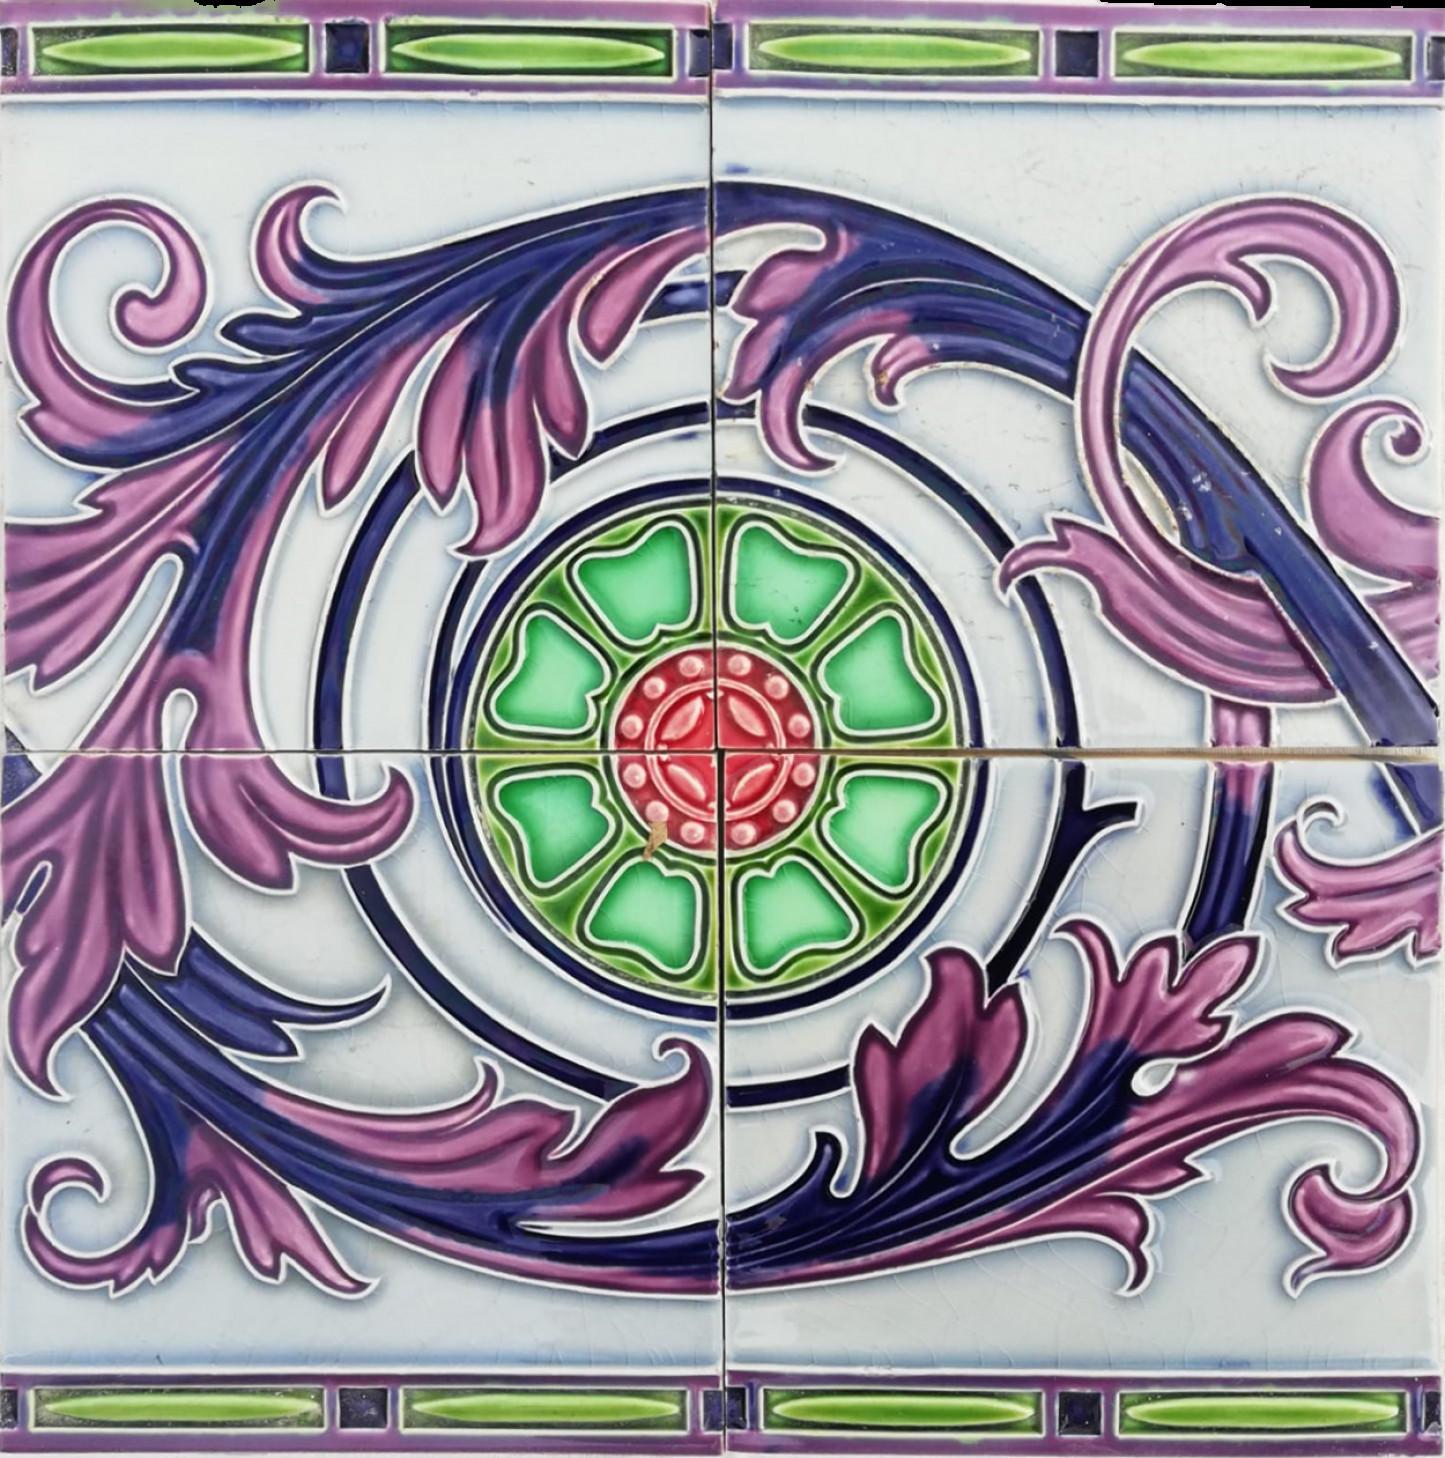 1 of the 60 handmade tiles in rich purple and lightblue glazed colors with beautiful circular floral design. Manufactured around 1920 by Gilliot Hemiksem, Belgium.  One tile set is divided in four squares, each symmetrically designed with a floral